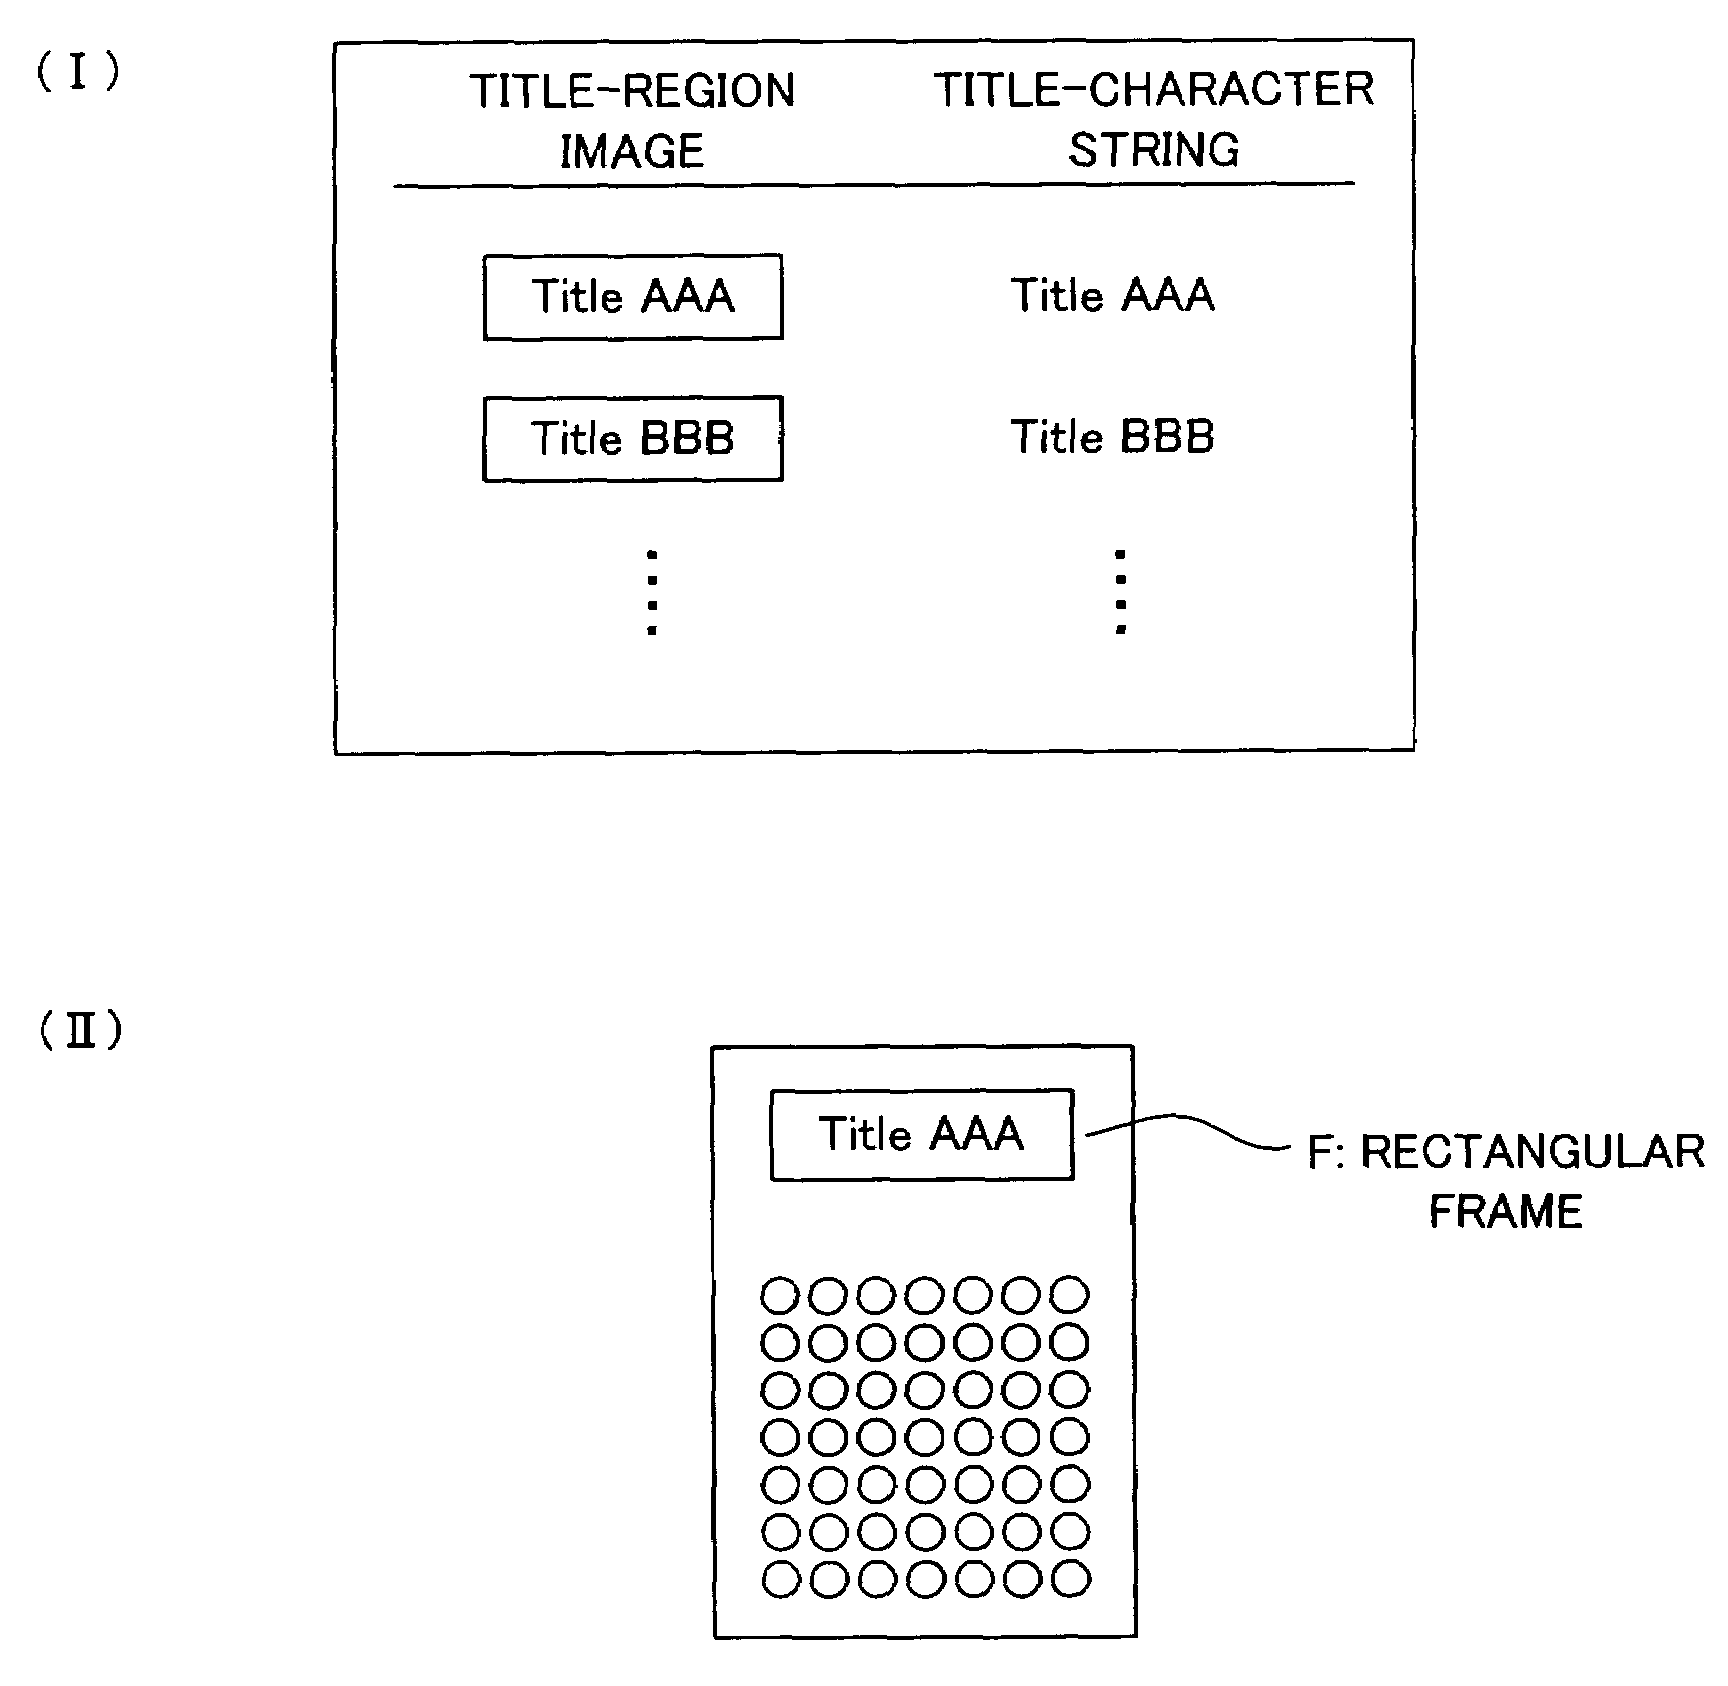 Document image processor, method for extracting document title, and method for imparting document tag information